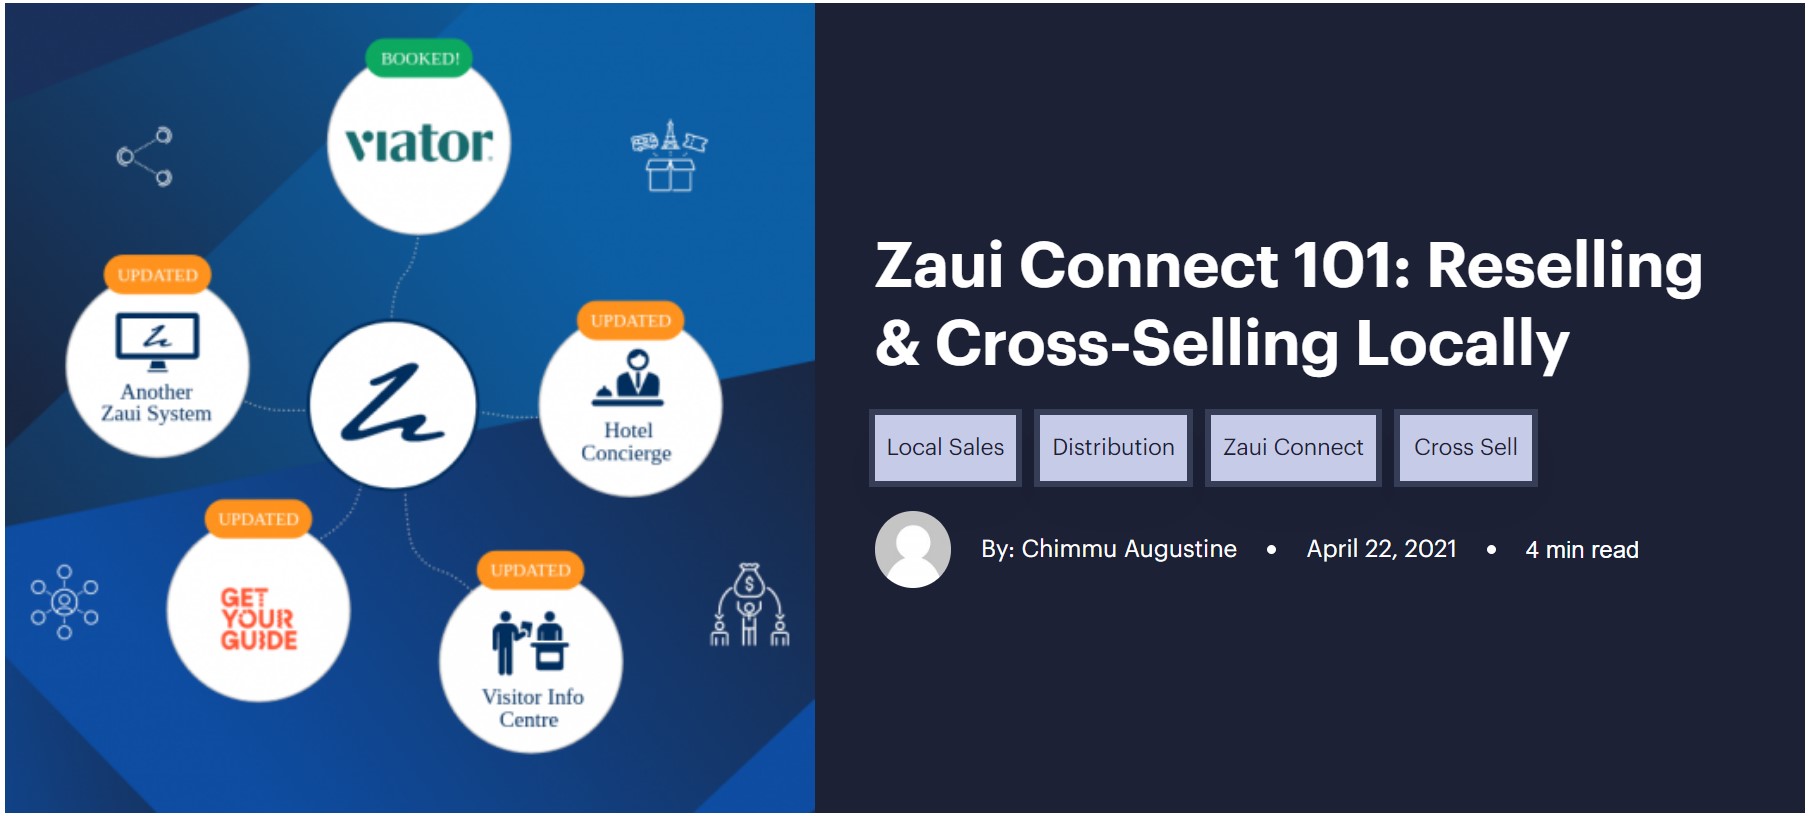 OCTo and Zaui connect Suppliers within destinations to resell and cross-sell.